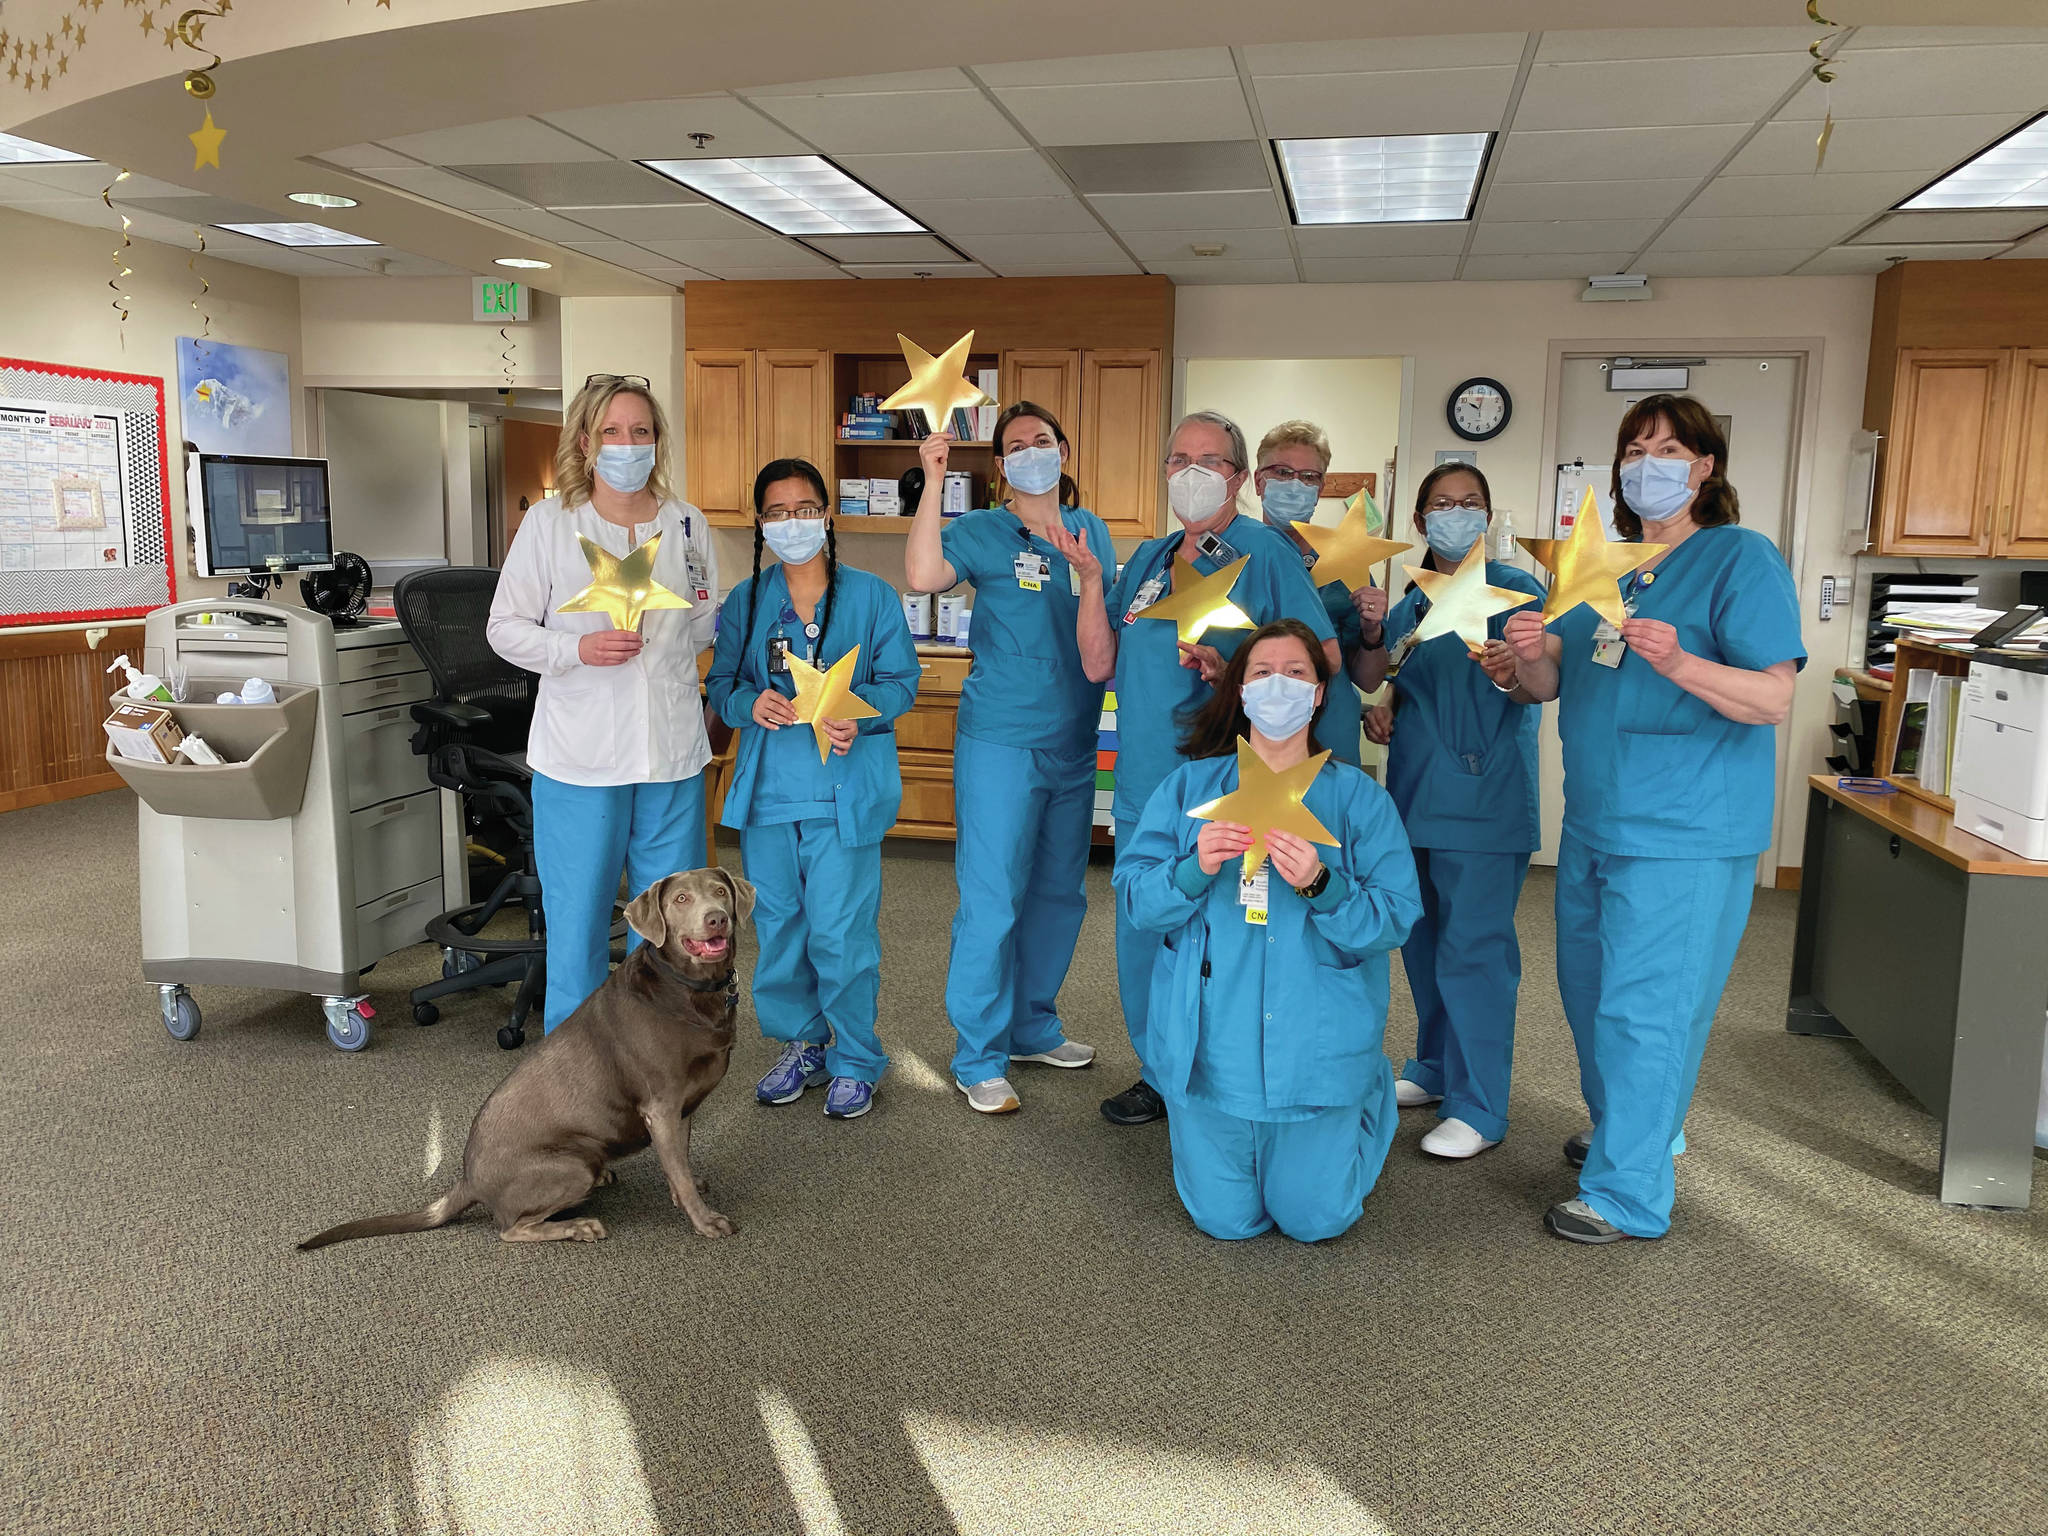 Long Term Care staff celebrate receiving the five-star rating from the Centers for Medicare & Medicaid Services on Feb. 19, 2021, at South Peninsula Hospital in Homer, Alaska. From left to right are Cathy Myers, Director of Nursing; Bella the dog, Nanet Minke, Certified Nursing Assistant; Nicole McKinney,CNA; Bonnie Betley, Registered Nurse; Susan Hubbard, CNA, Ana Jones, CNA; Leone Morra RN; and Melissa Dunkle CNA, in the front kneeling. (Photo courtesy South Peninsula Hospital)